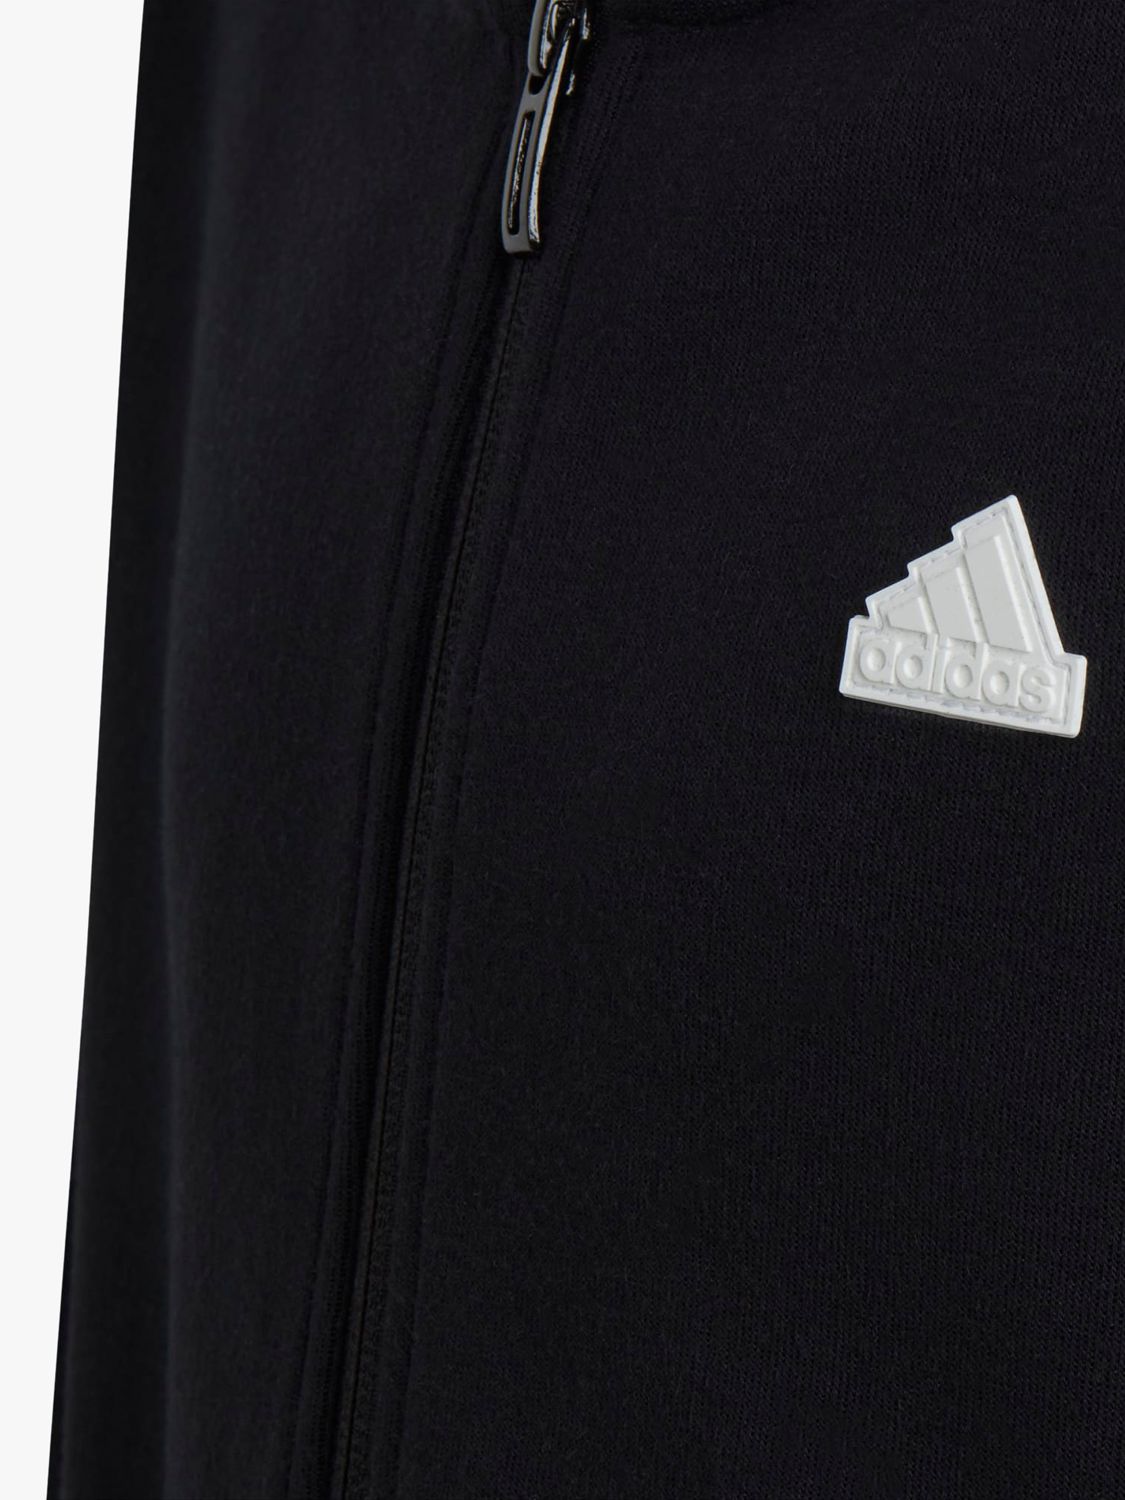 Buy adidas Kids' Future Icons 3 Stripes Full Zip Hooded Tracksuit Top, Black/White Online at johnlewis.com